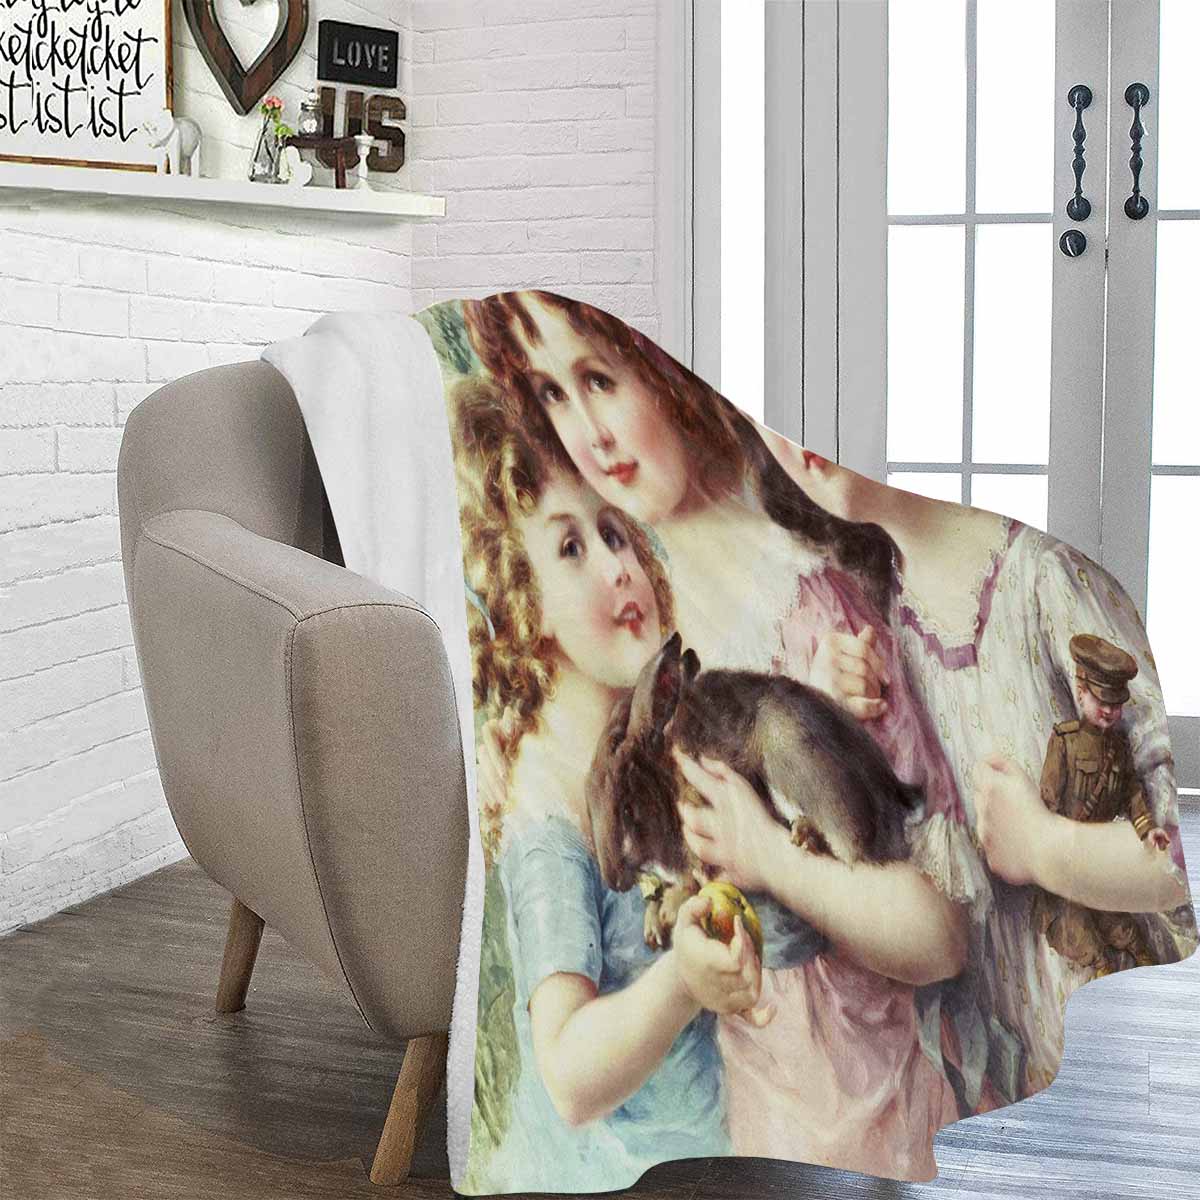 Victorian Girls Design BLANKET, LARGE 60 in x 80 in, Three Graces